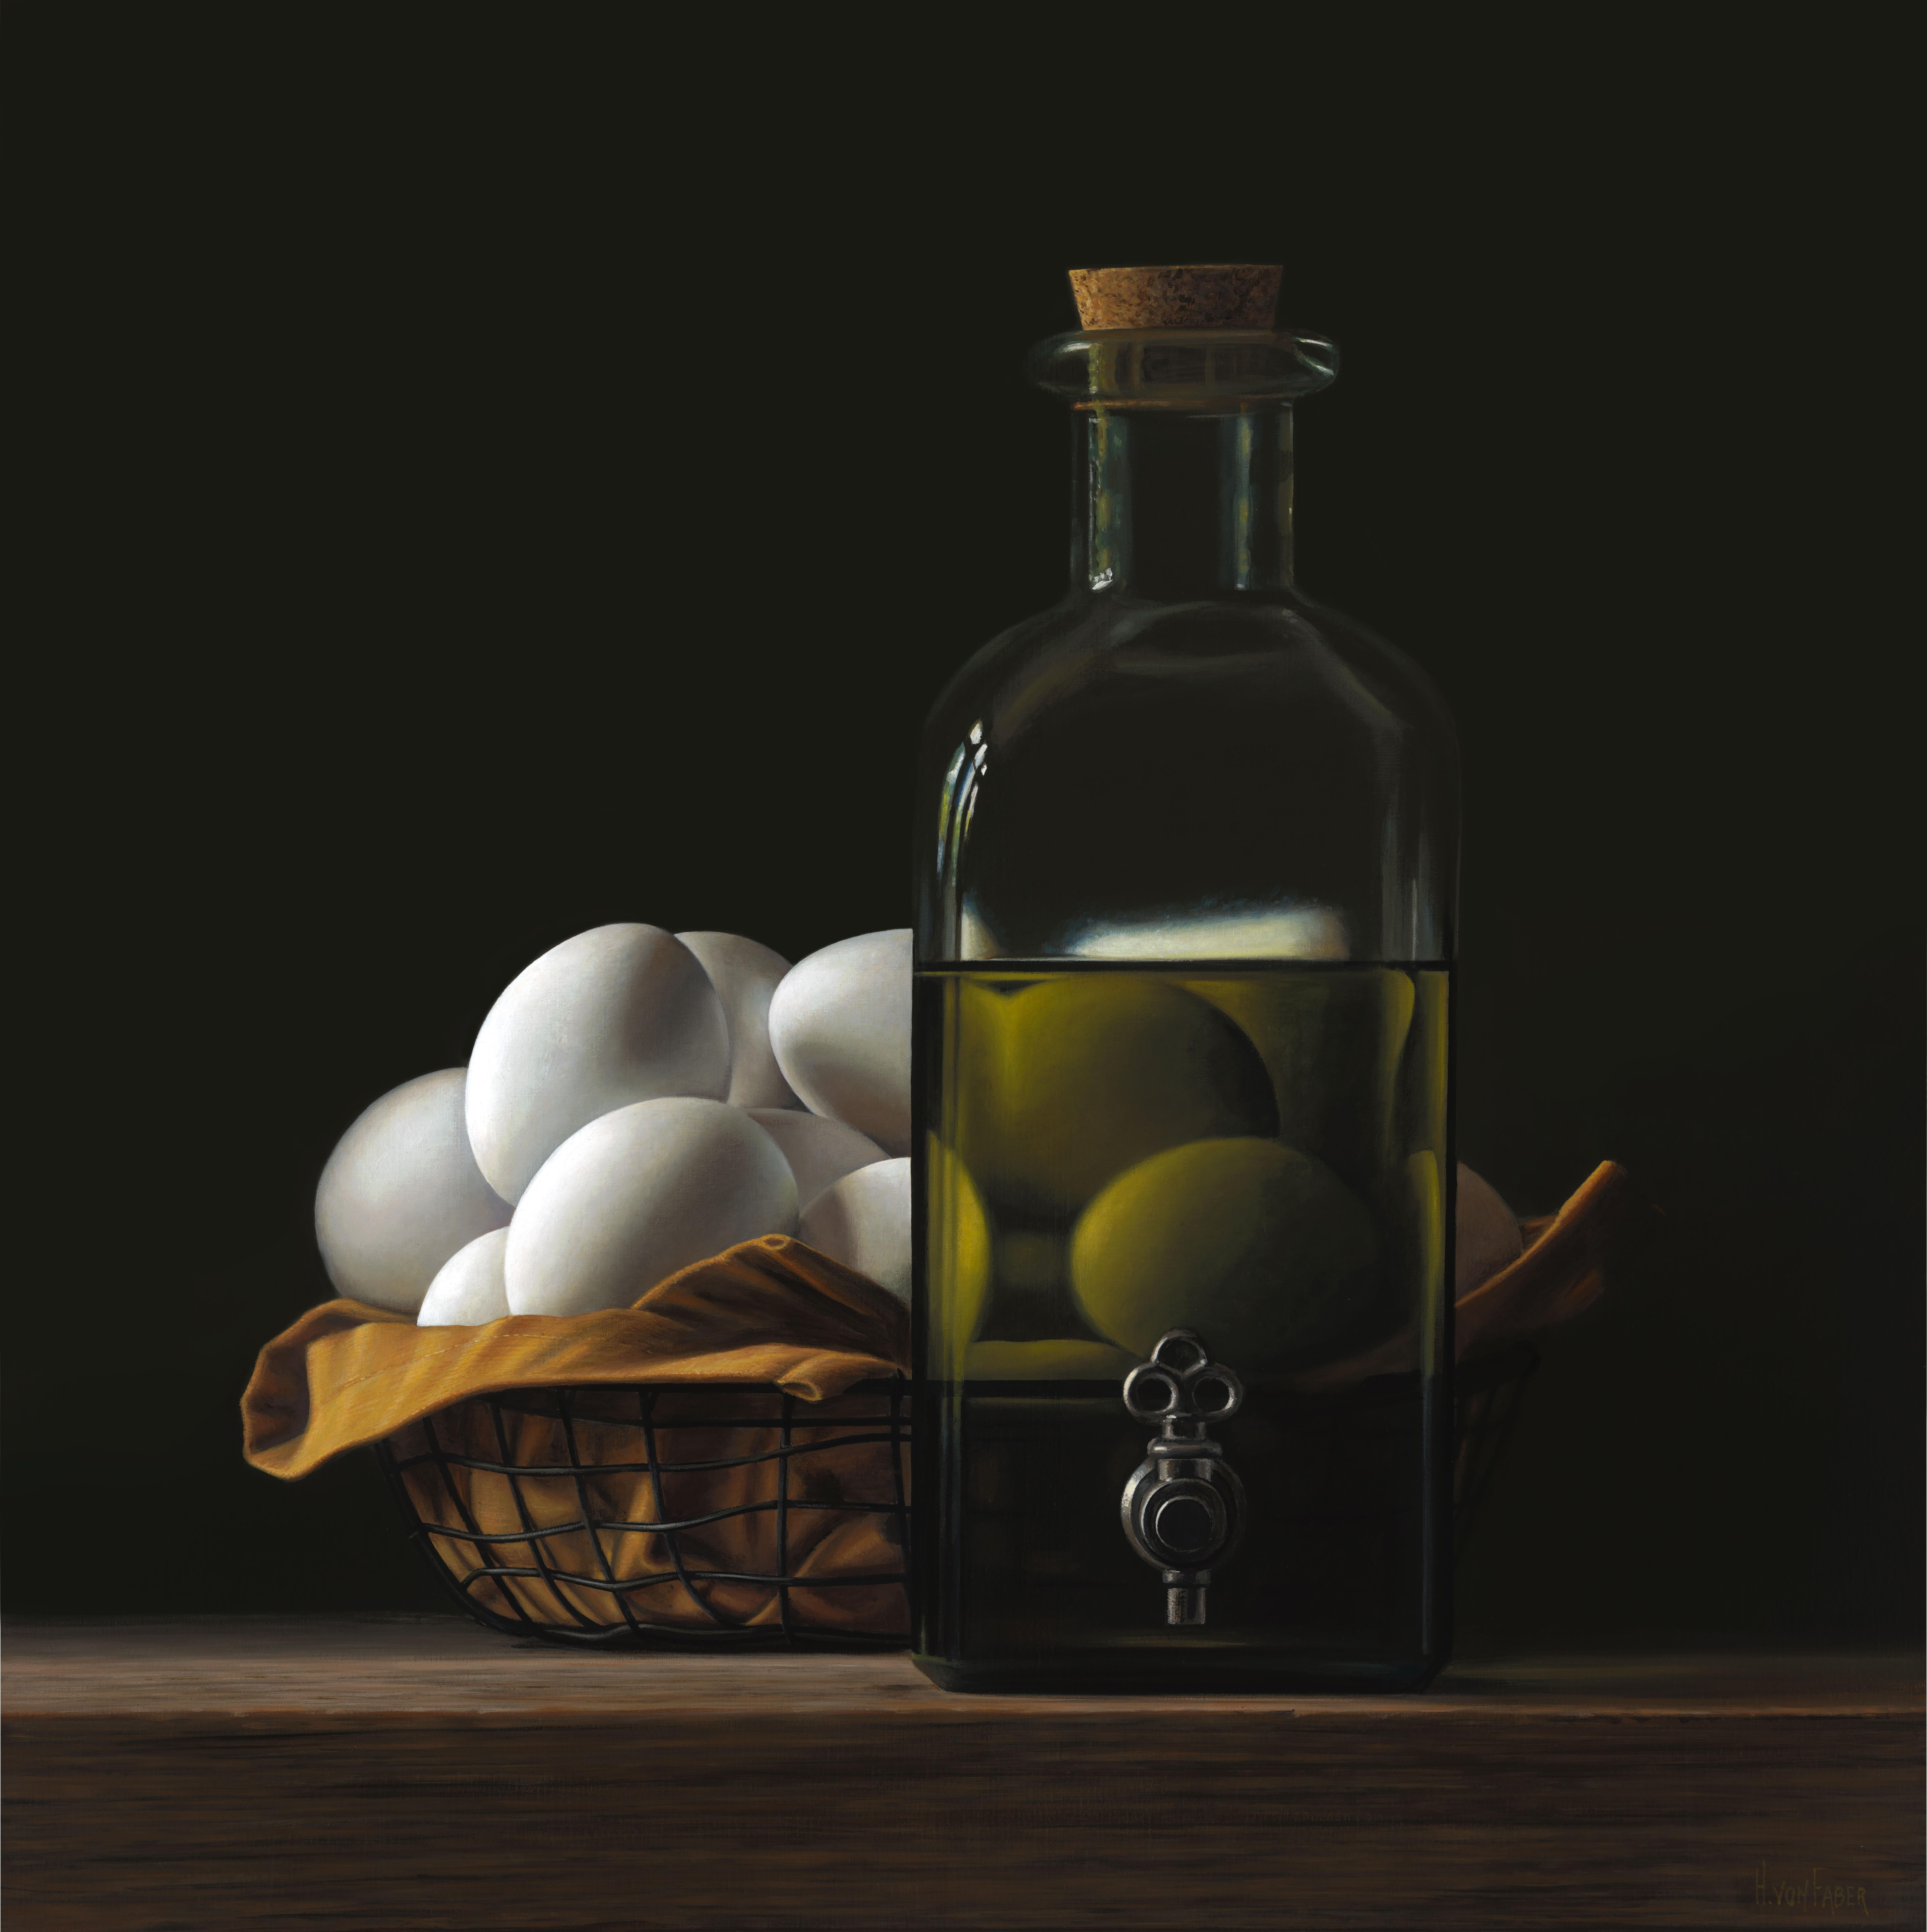 Heidi von Faber Figurative Painting - Bottle of Oil with Eggs- 21st Century Contemporary Still-life Painting with Eggs